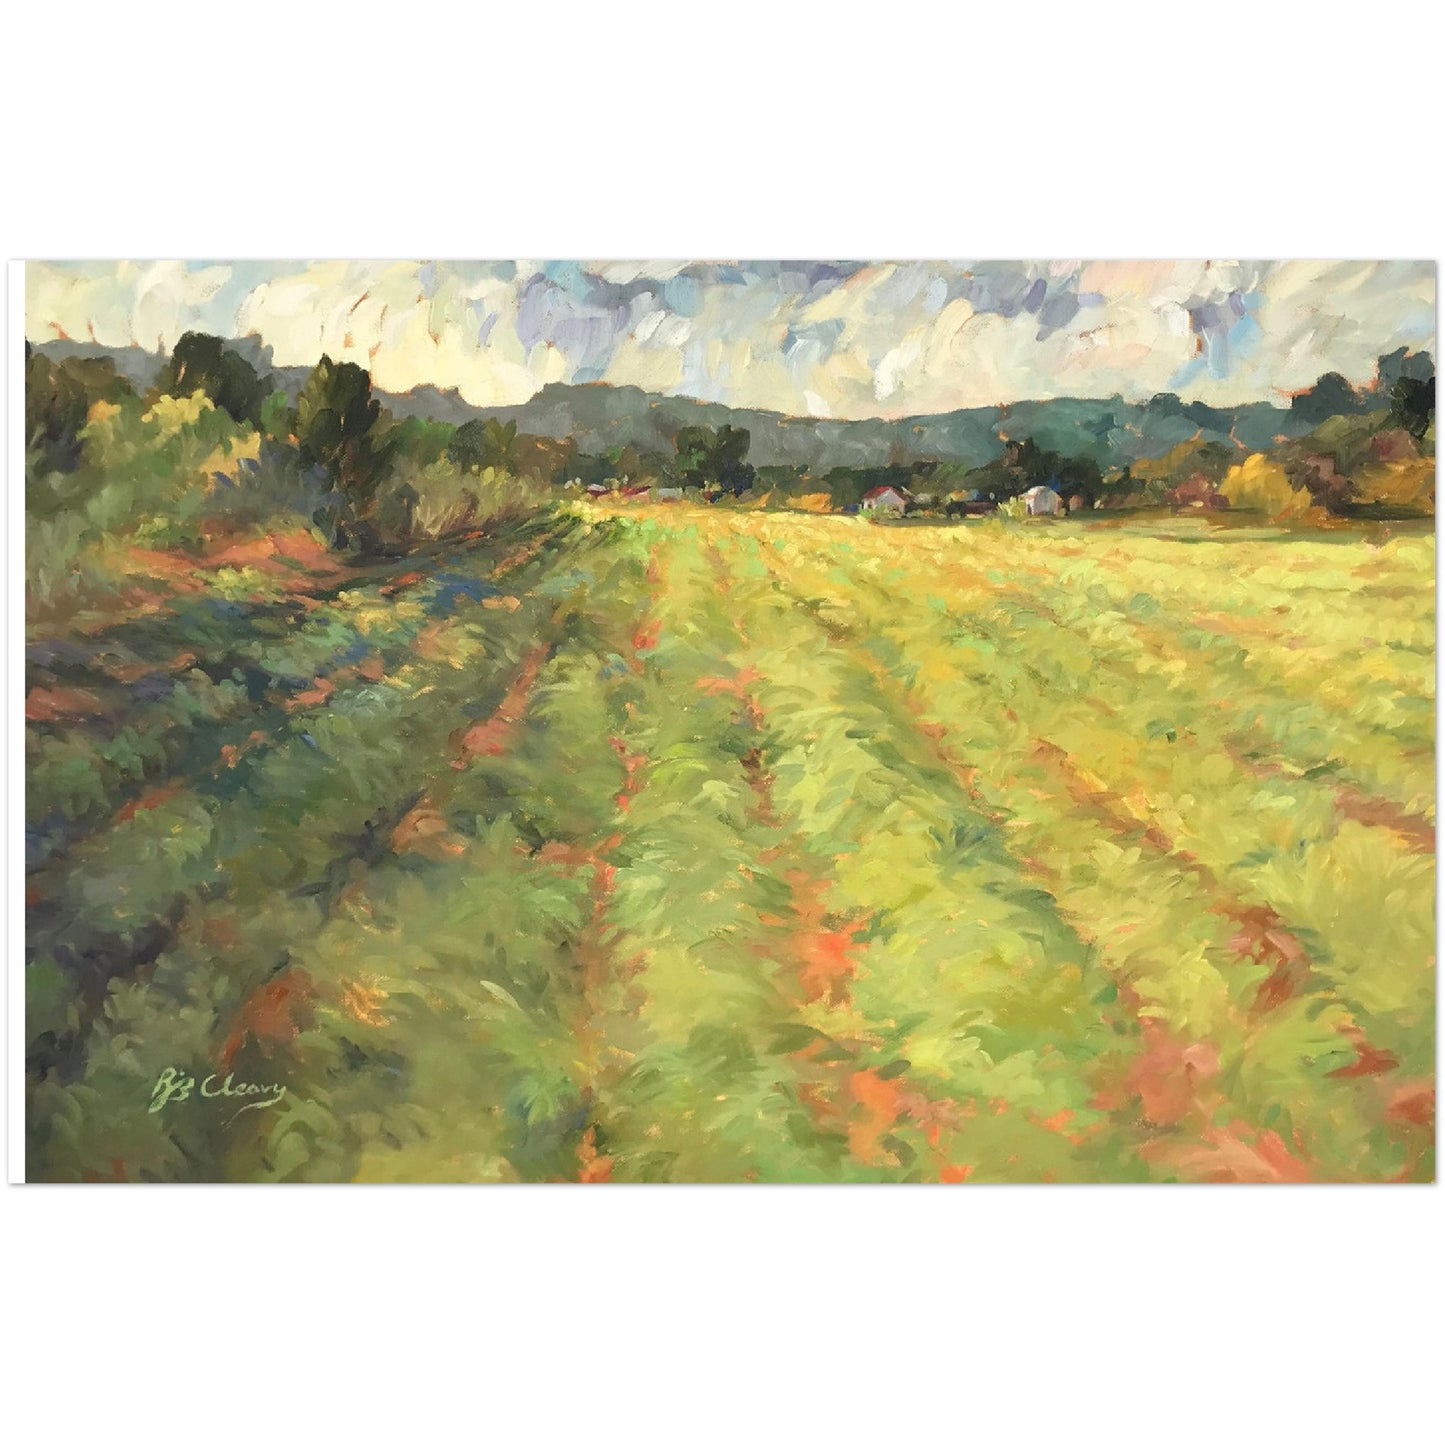 "Harvest" Landscape Pack of 10 postcards (2-sided, No envelopes, US & CA) by Barbara Cleary Designs